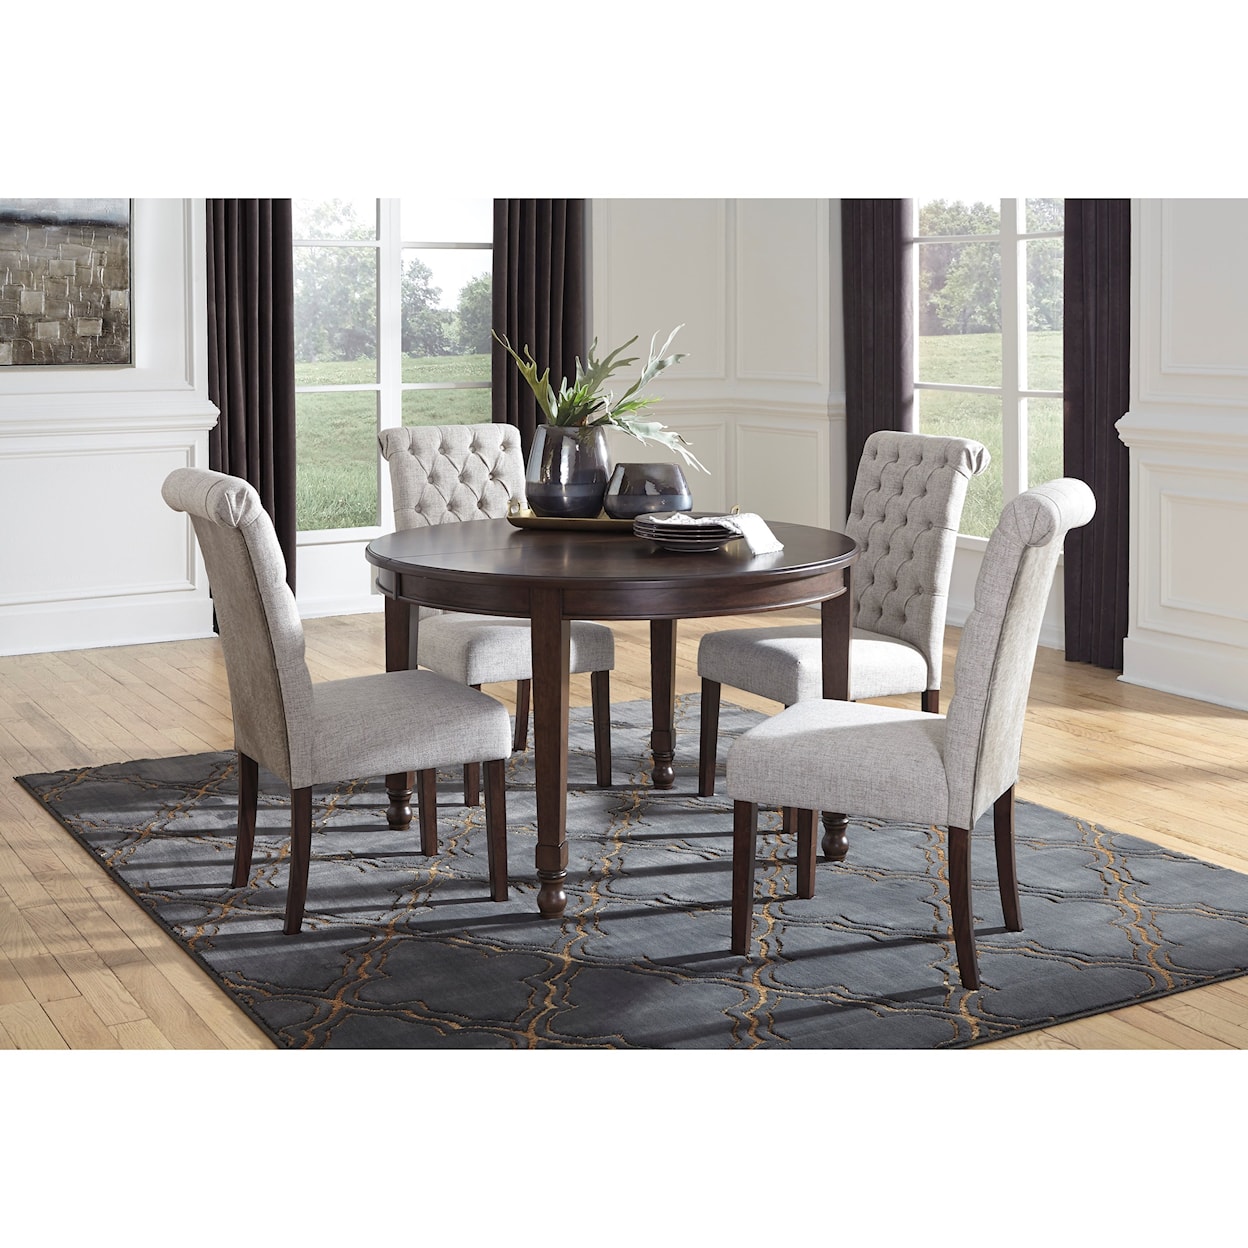 StyleLine Adinton 5-Piece Table and Chair Set